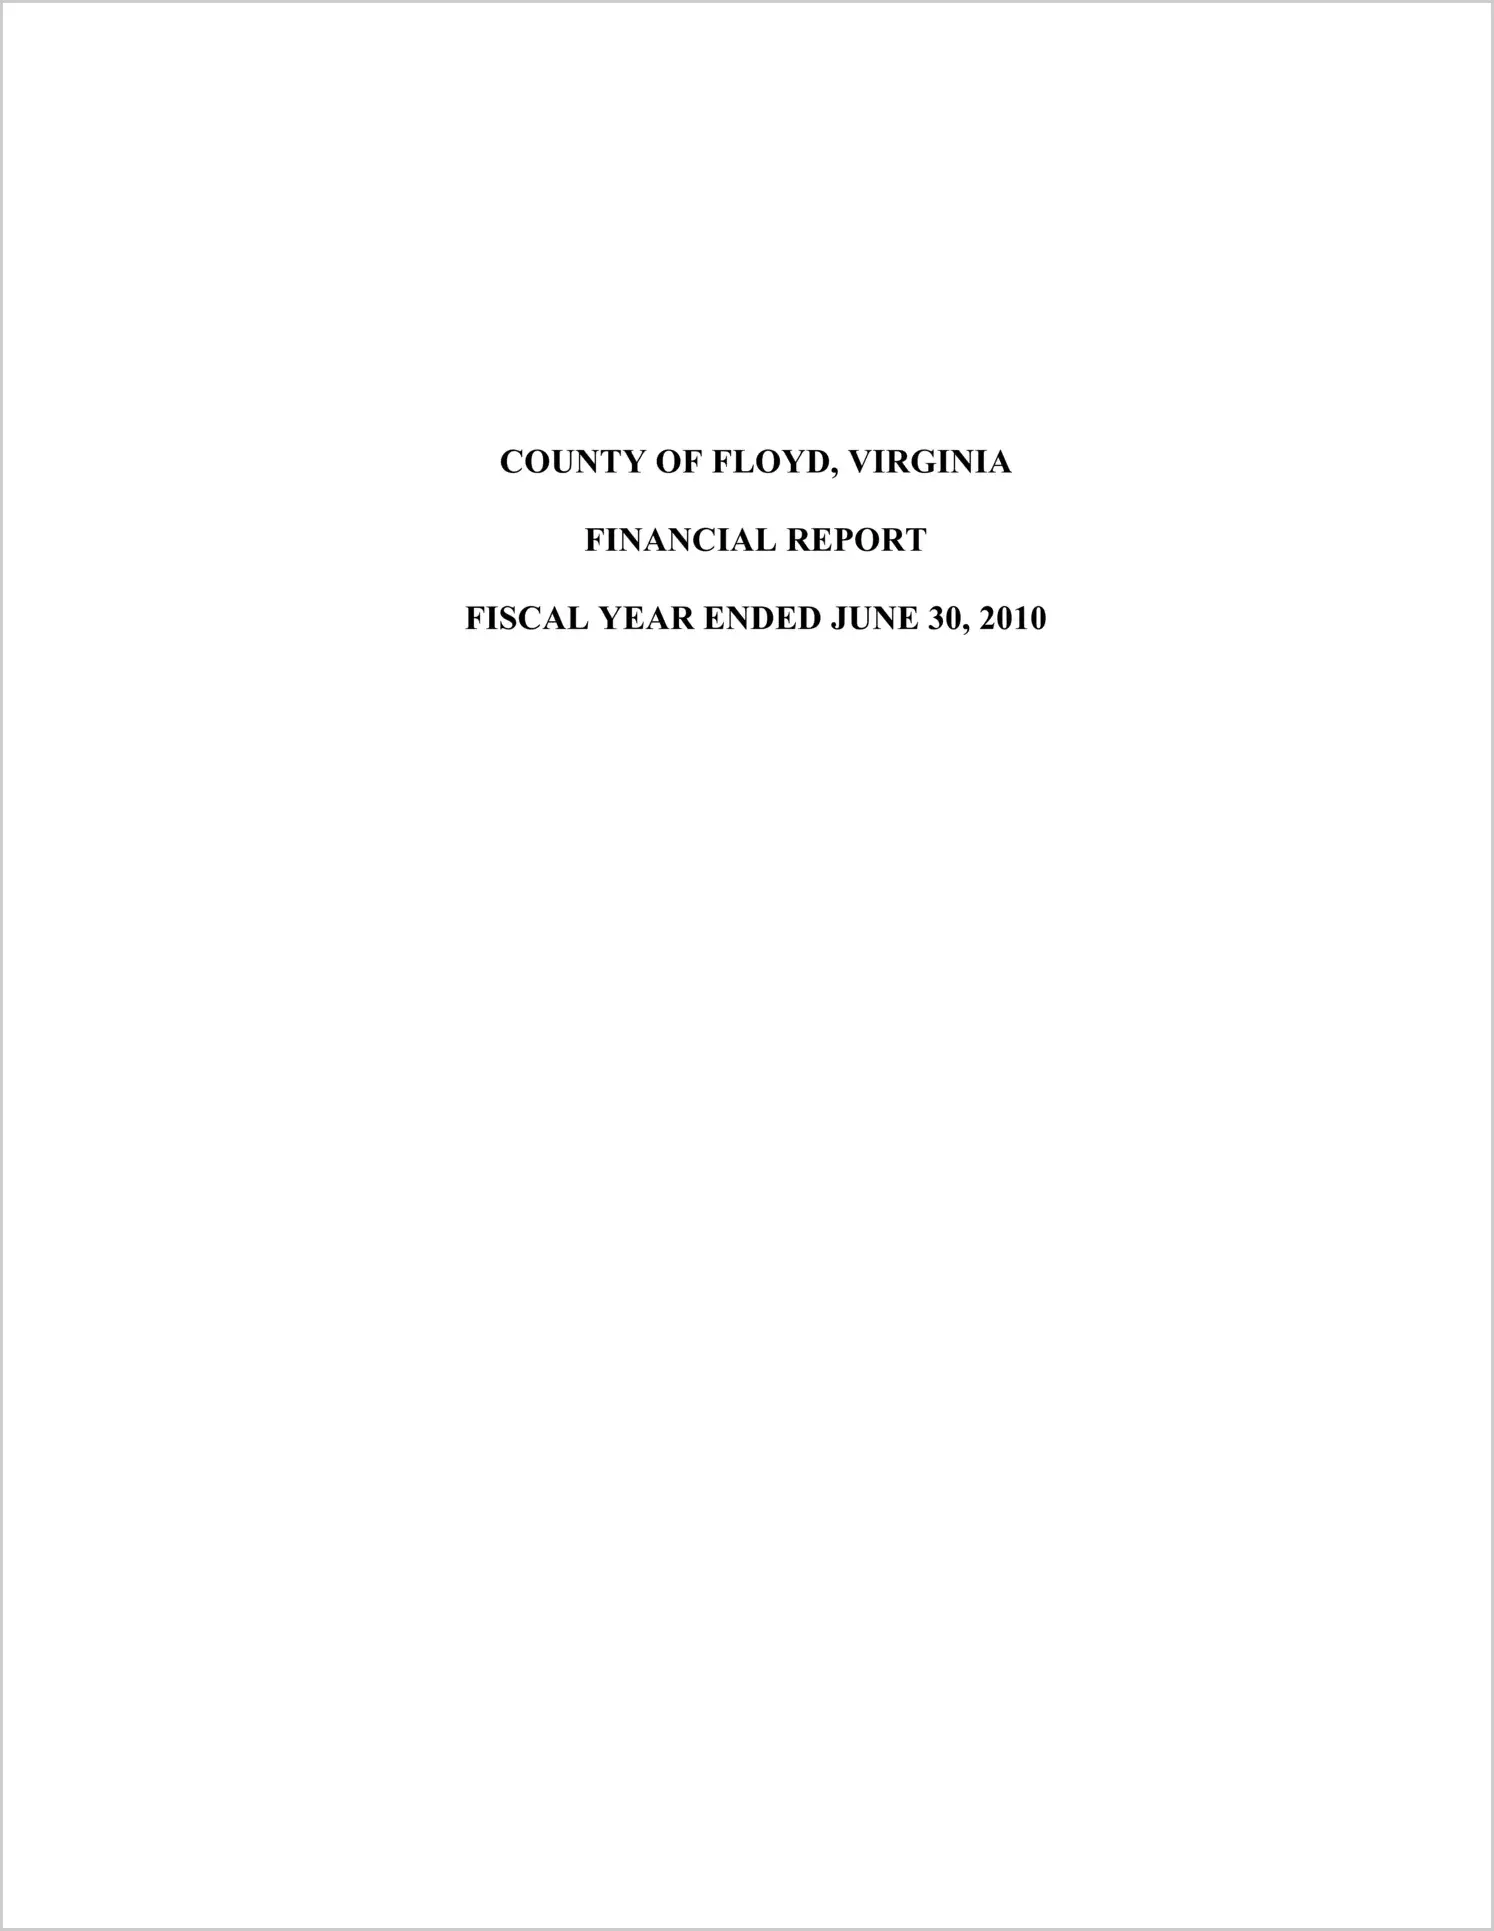 2010 Annual Financial Report for County of Floyd